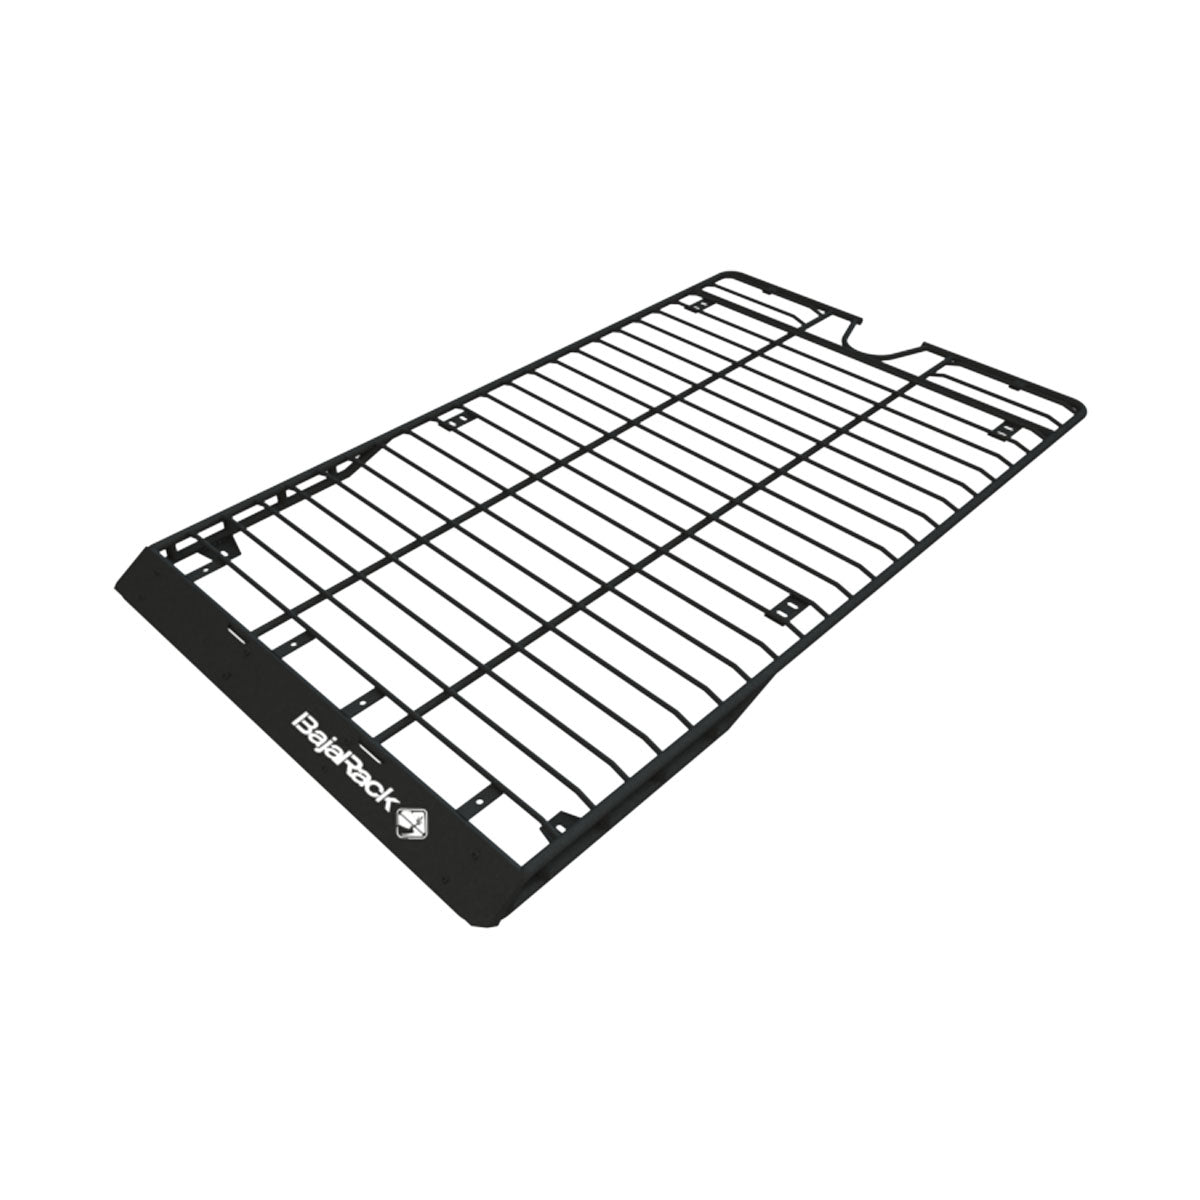 Land Rover Utility Flat Roof Rack